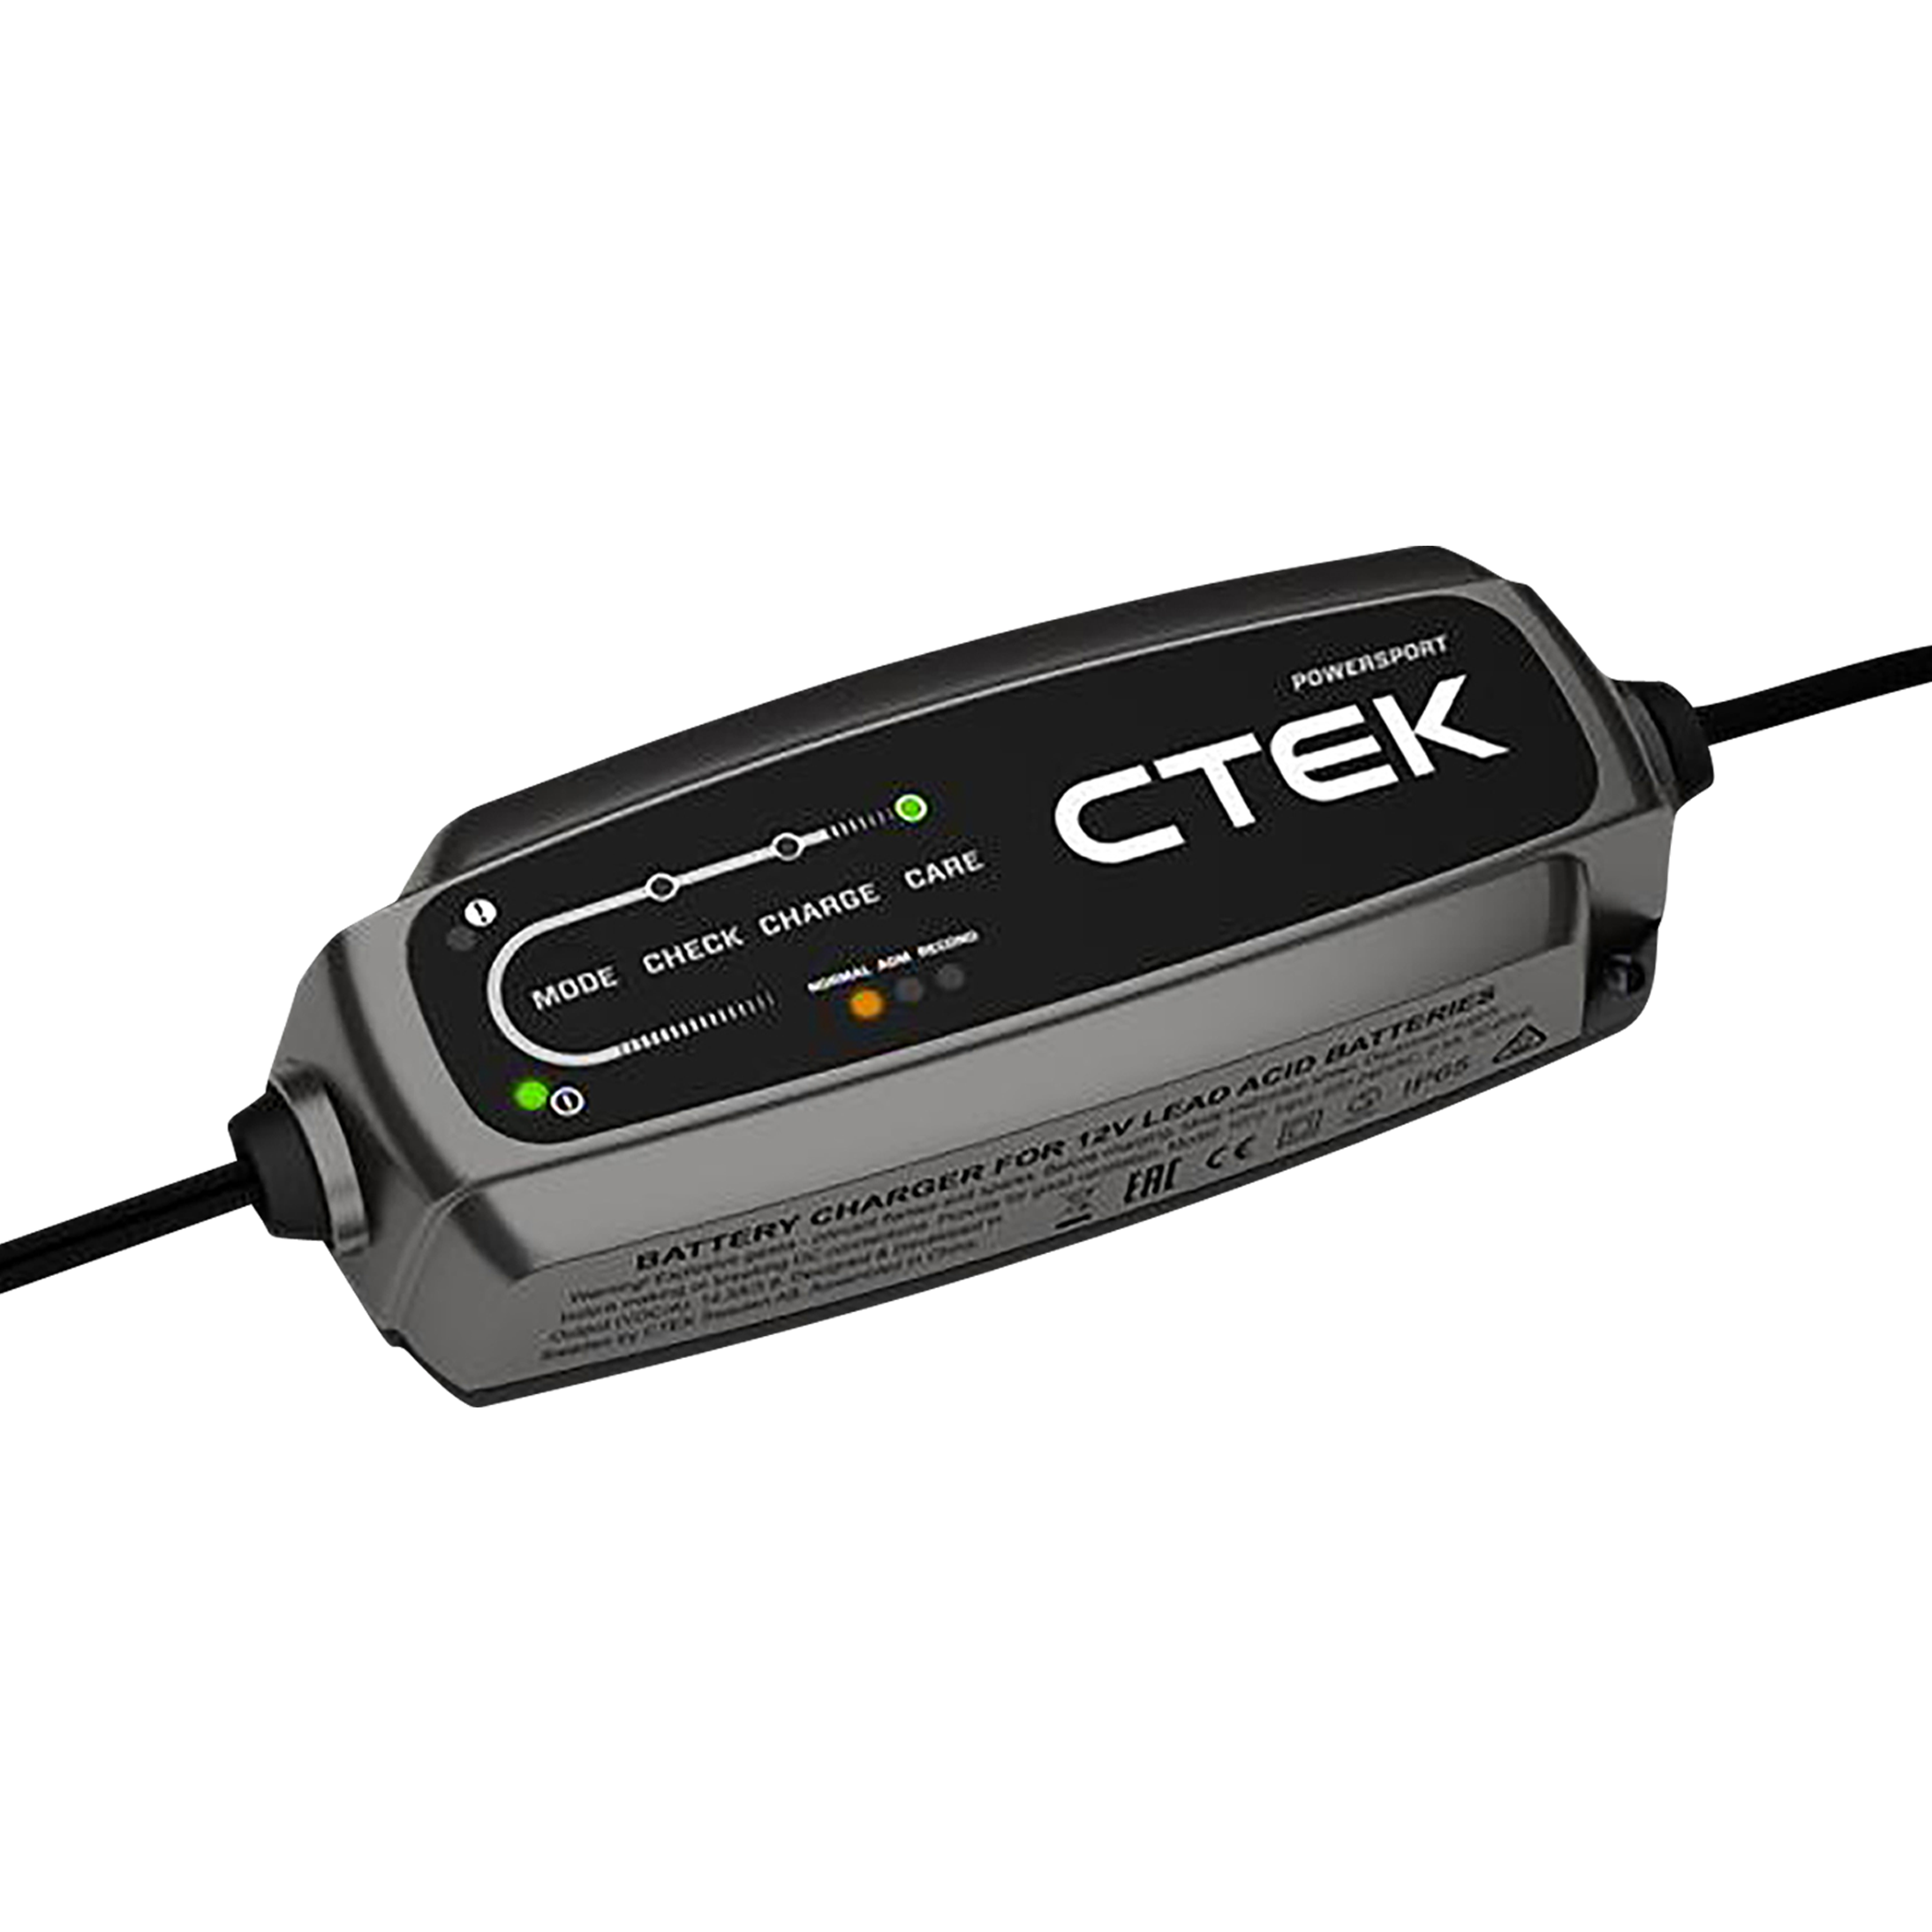 New CTEK Battery Charger CT5 Time To Go 12v 5Amp One Year